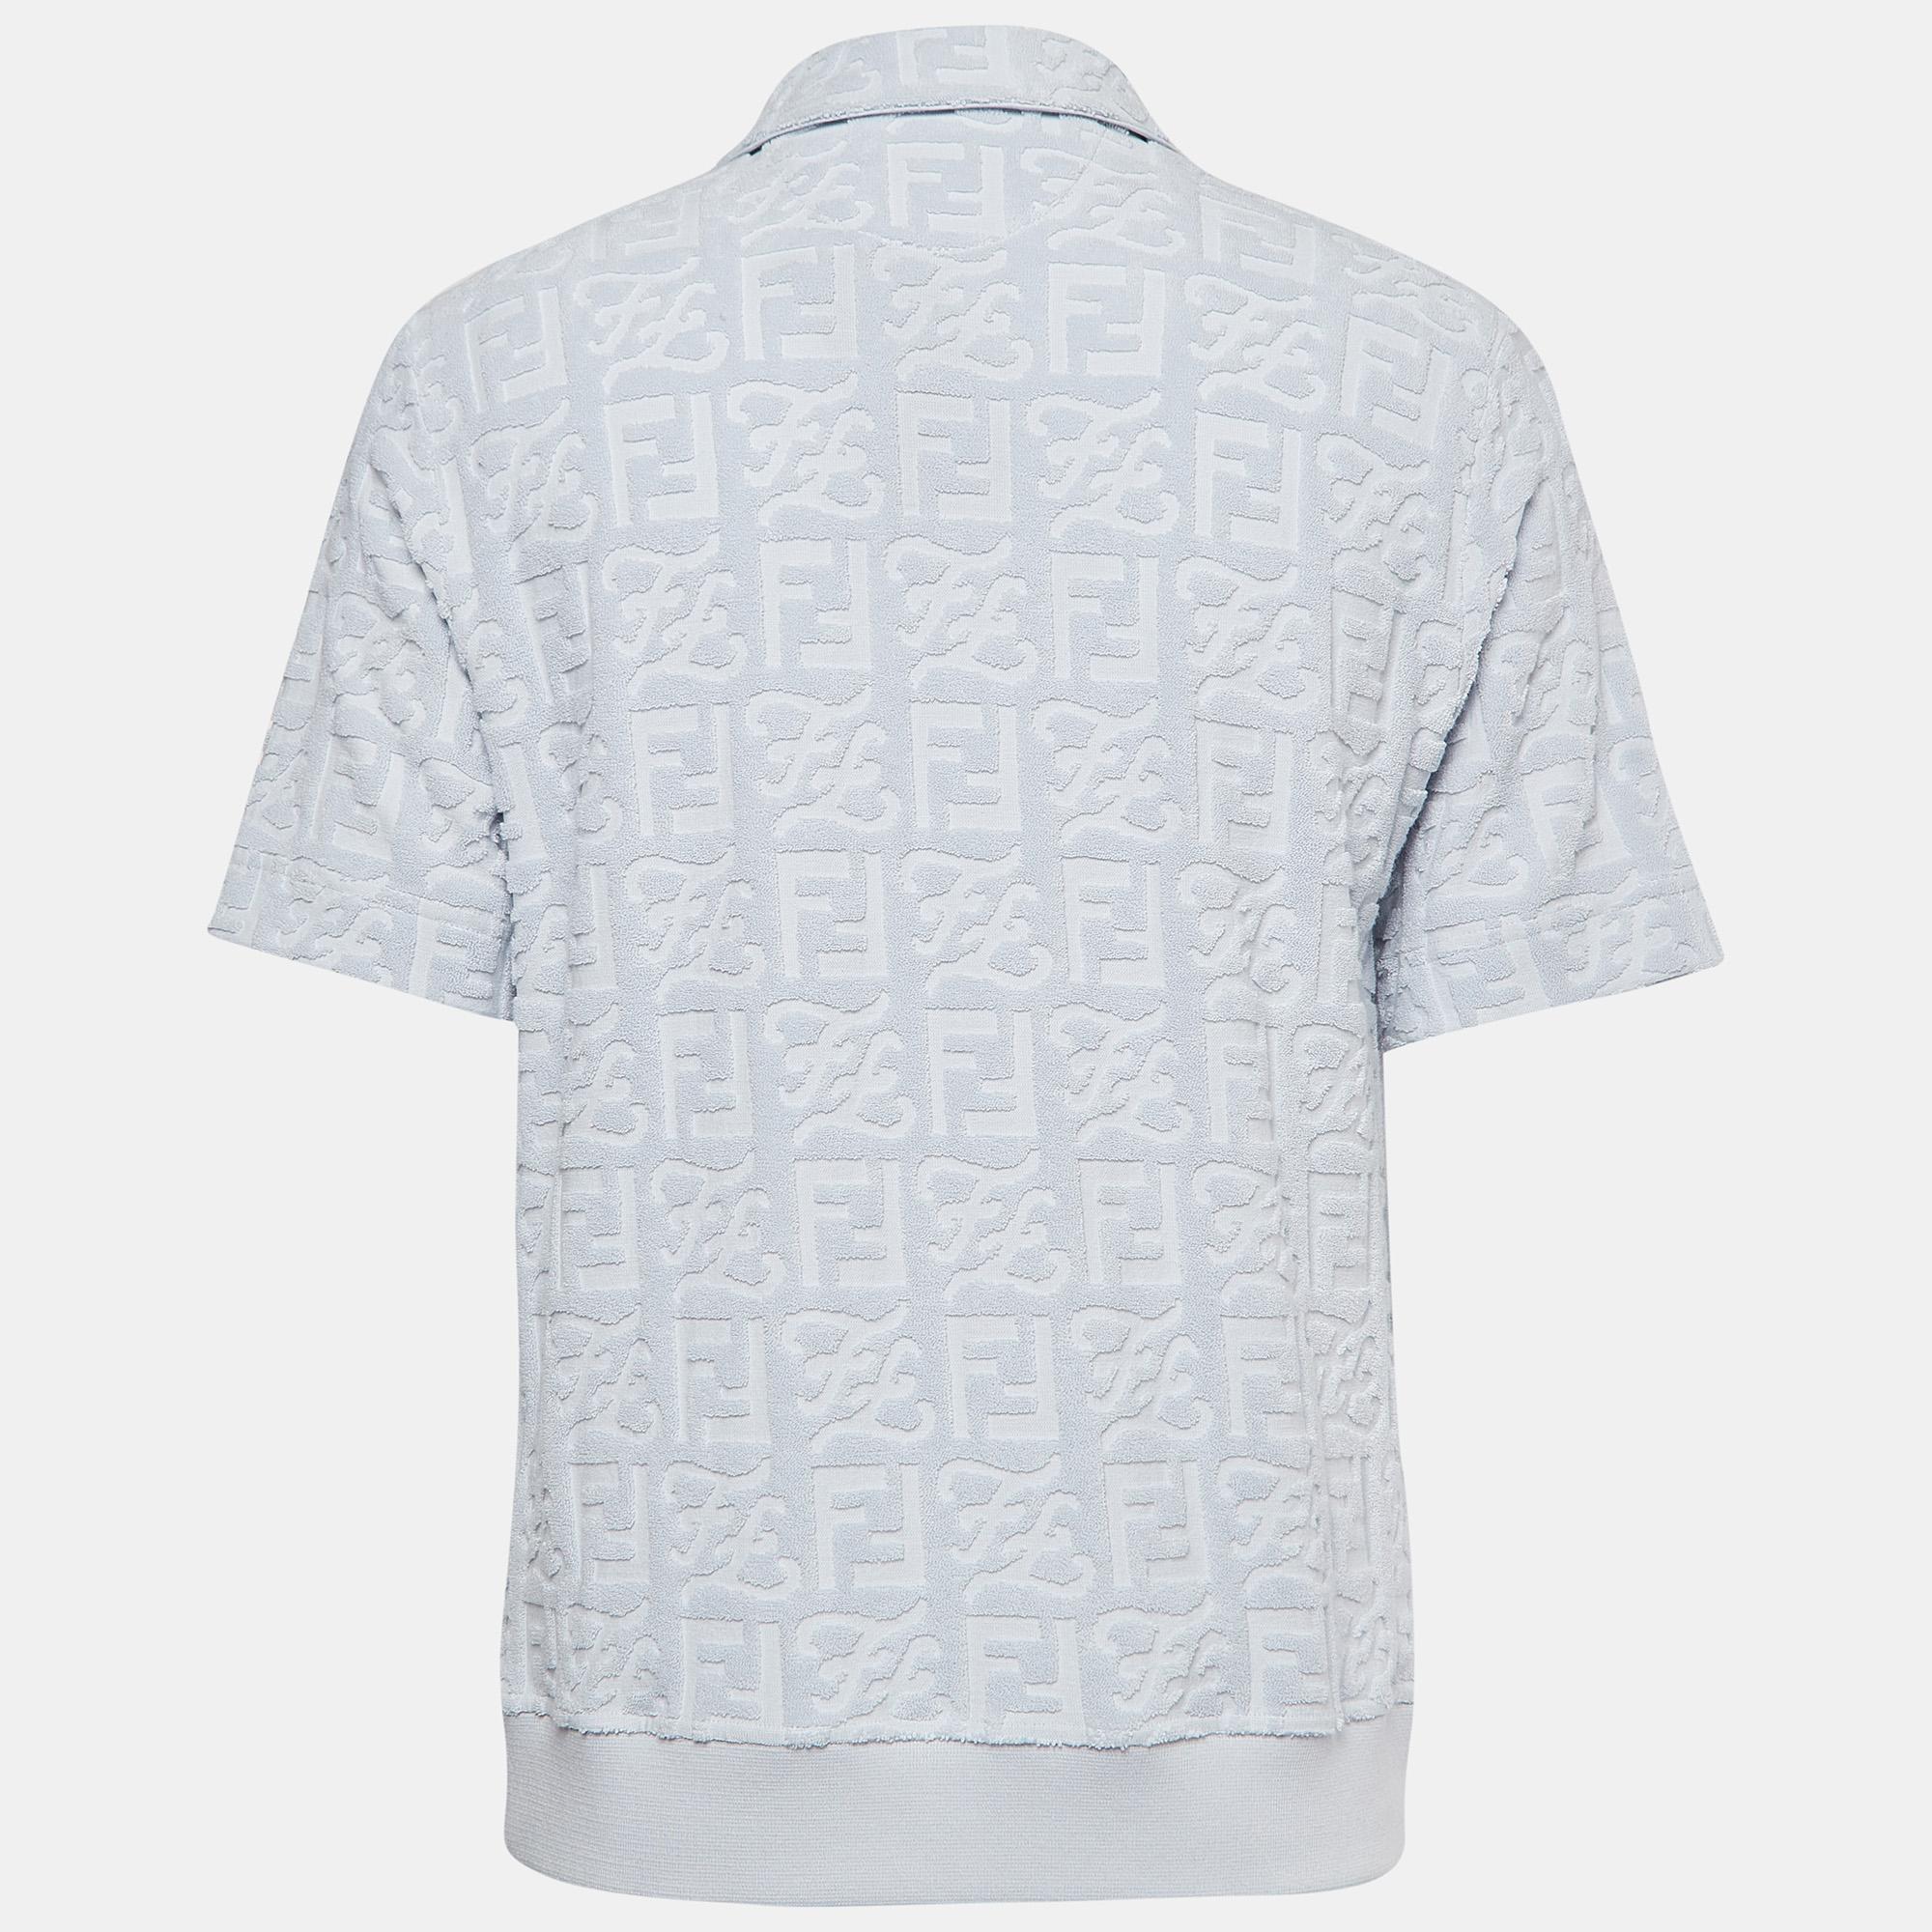 Whether you want to go out on casual outings with friends or just want to lounge around, this t-shirt is a versatile piece and can be styled in many ways. It has been made using fine fabric.

Includes: Brand Tag